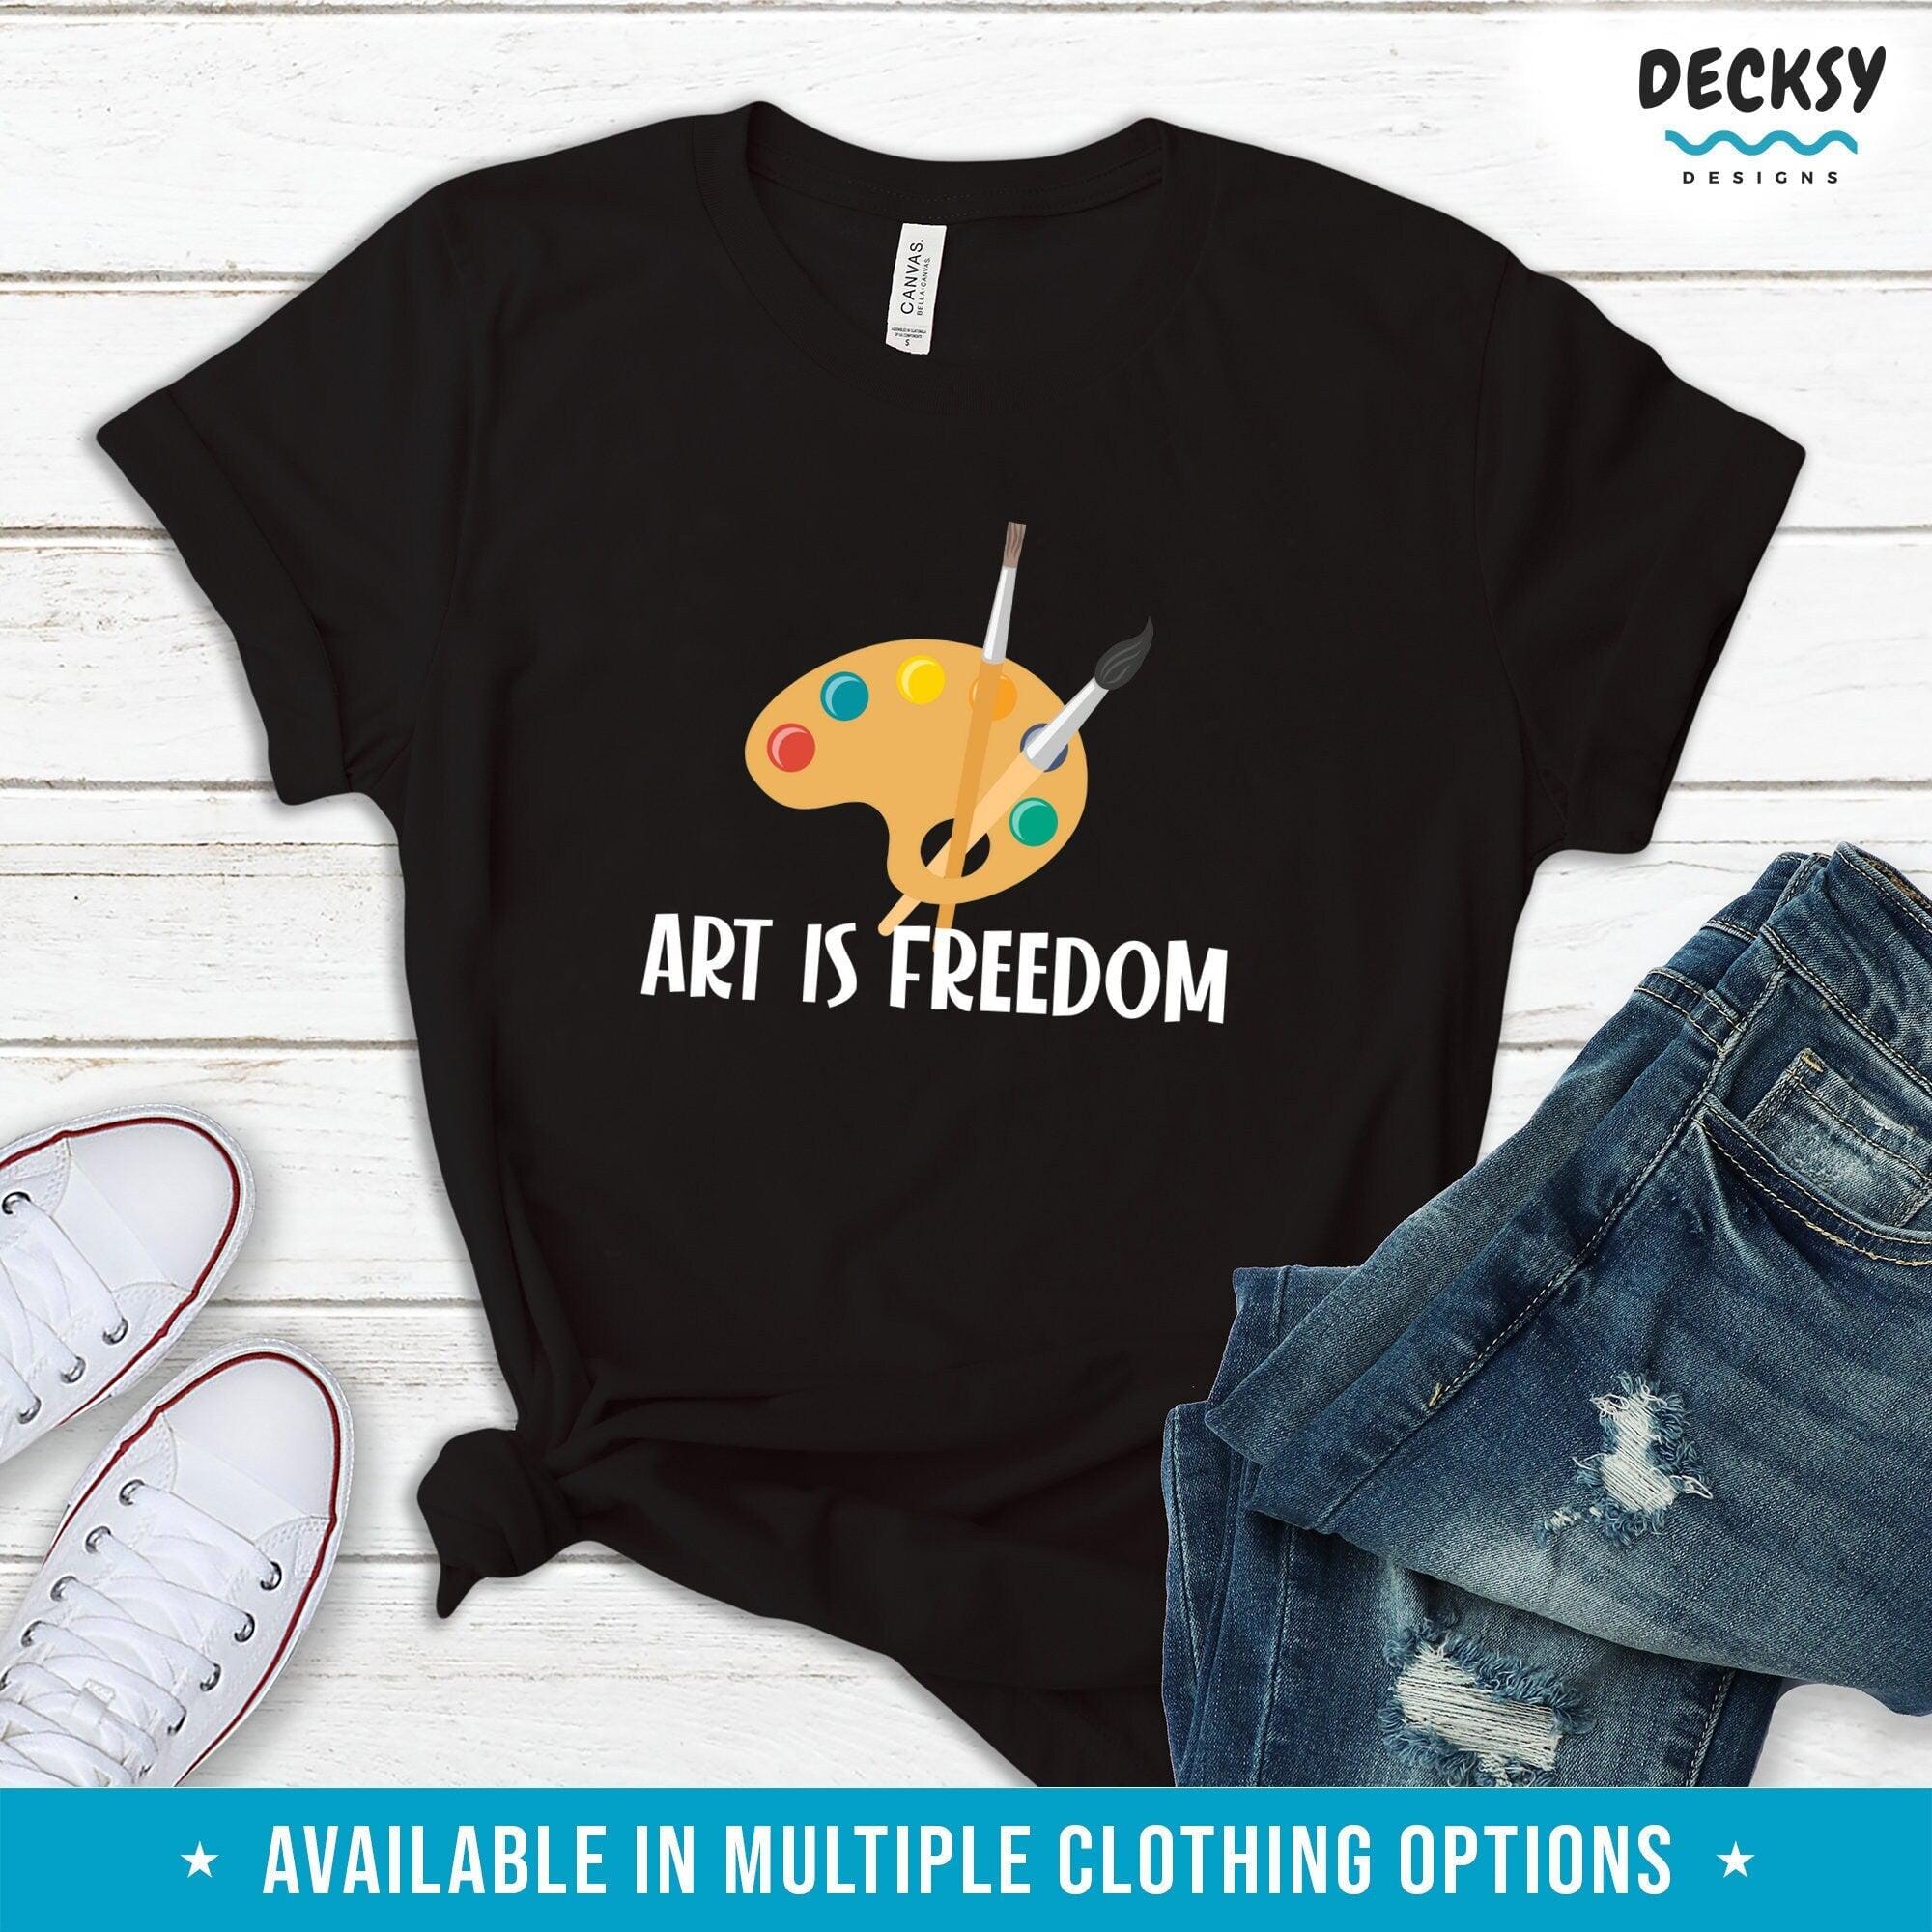 Art Is Freedom Shirt, Gift For Artist-Clothing:Gender-Neutral Adult Clothing:Tops & Tees:T-shirts:Graphic Tees-DecksyDesigns